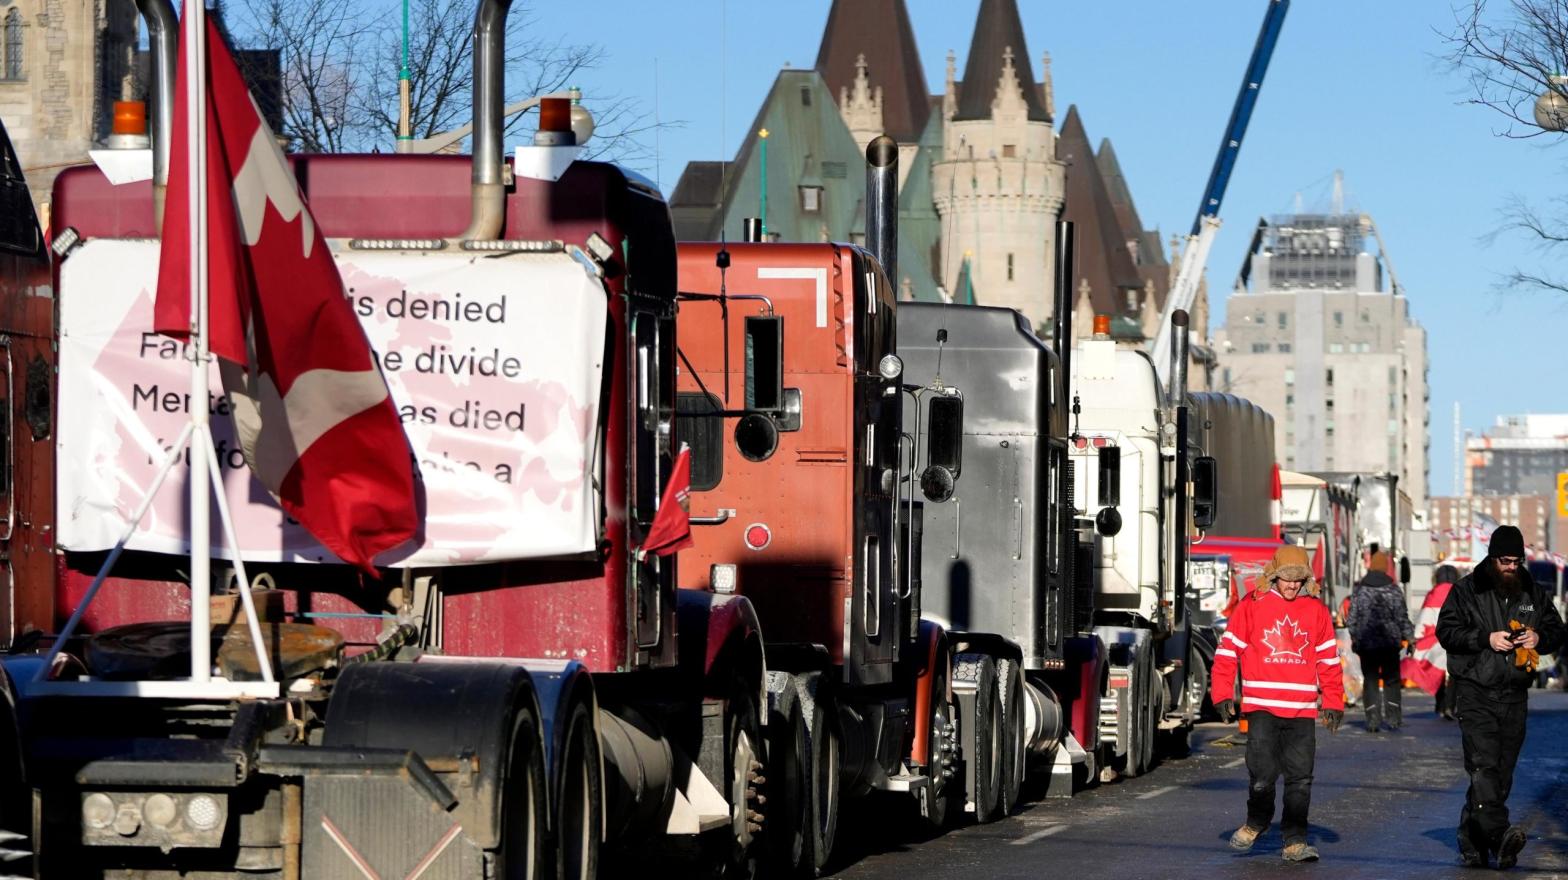 Wellington Street is lined with trucks once again after city officials negotiated to move some trucks away from downtown residences, on the 18th day of a protest against COVID-19 measures that has grown into a broader anti-government protest, in Ottawa, on Monday, Feb. 14, 2022. (Photo: Justin Tang/The Canadian Press via AP, AP)